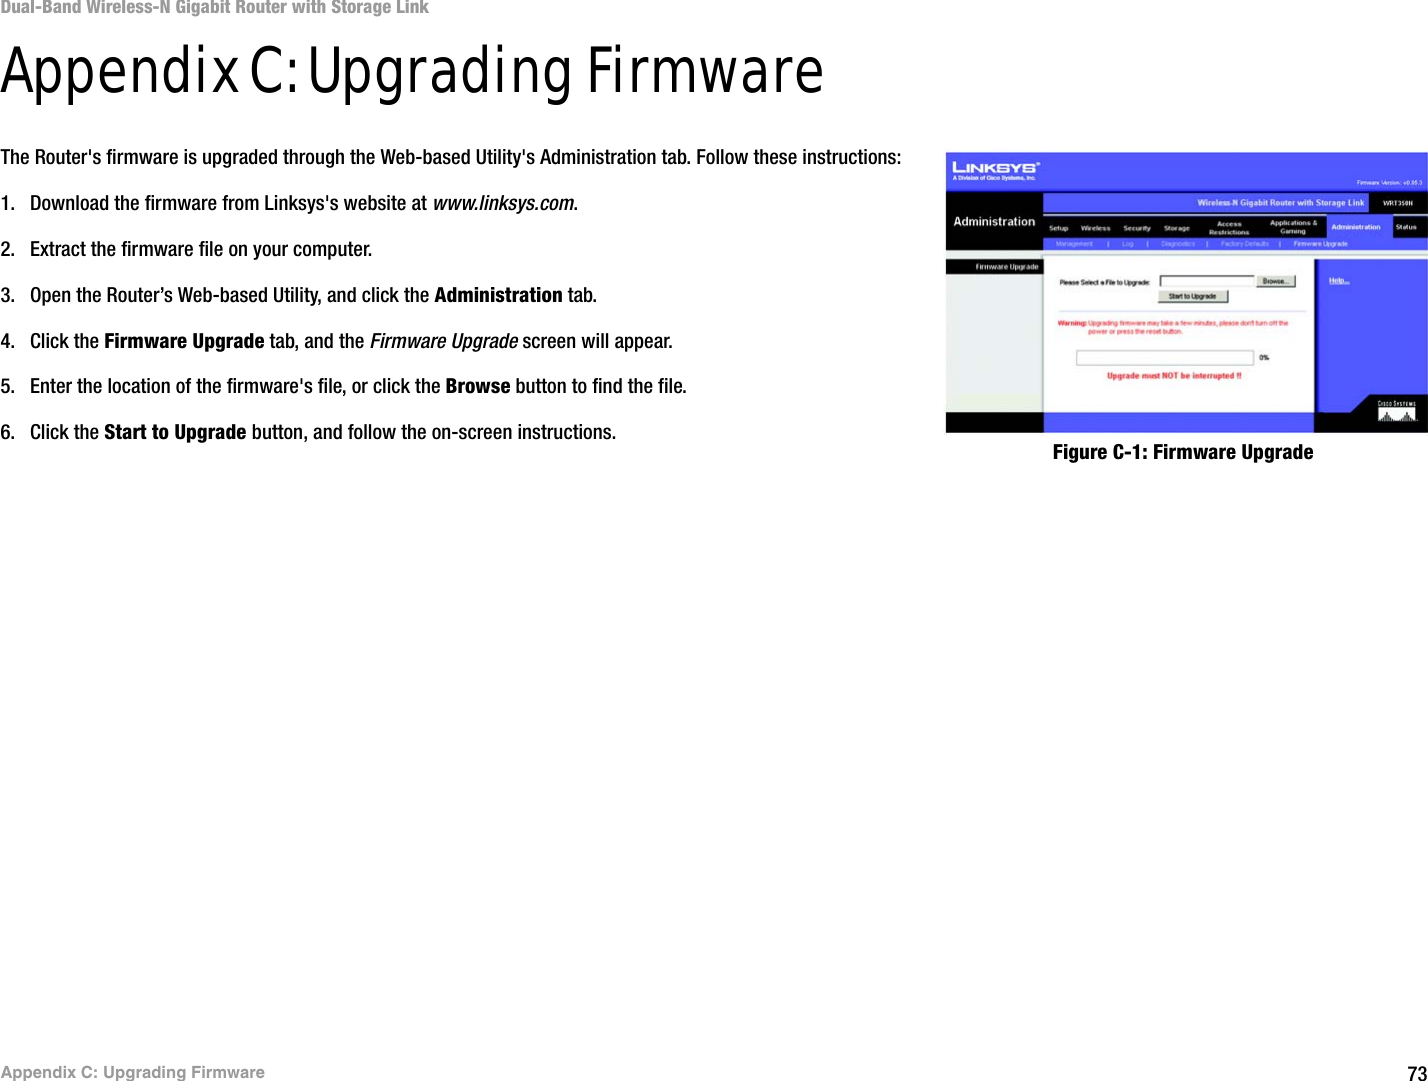 73Appendix C: Upgrading FirmwareDual-Band Wireless-N Gigabit Router with Storage LinkAppendix C: Upgrading FirmwareThe Router&apos;s firmware is upgraded through the Web-based Utility&apos;s Administration tab. Follow these instructions:1. Download the firmware from Linksys&apos;s website at www.linksys.com.2. Extract the firmware file on your computer.3. Open the Router’s Web-based Utility, and click the Administration tab.4. Click the Firmware Upgrade tab, and the Firmware Upgrade screen will appear.5. Enter the location of the firmware&apos;s file, or click the Browse button to find the file.6. Click the Start to Upgrade button, and follow the on-screen instructions.Figure C-1: Firmware Upgrade